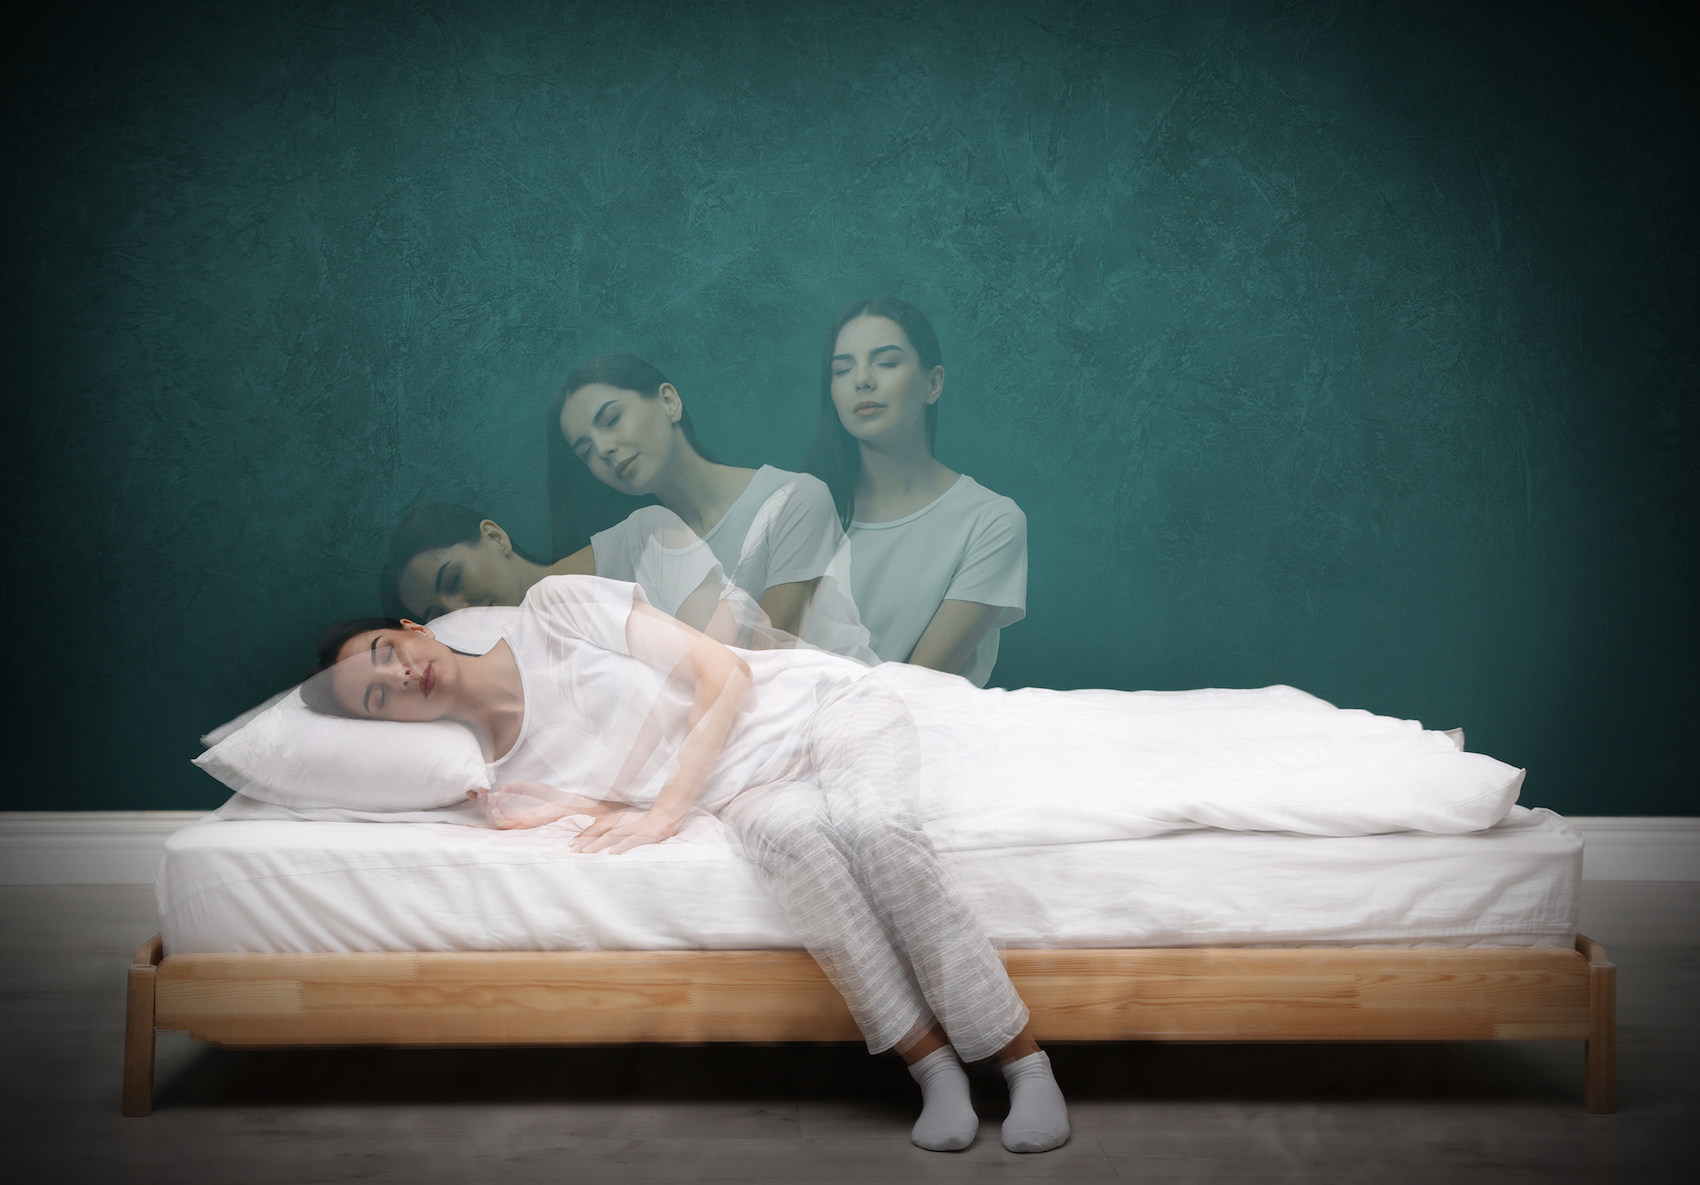 Sleepwalking: what it is, what it depends on and how to treat it